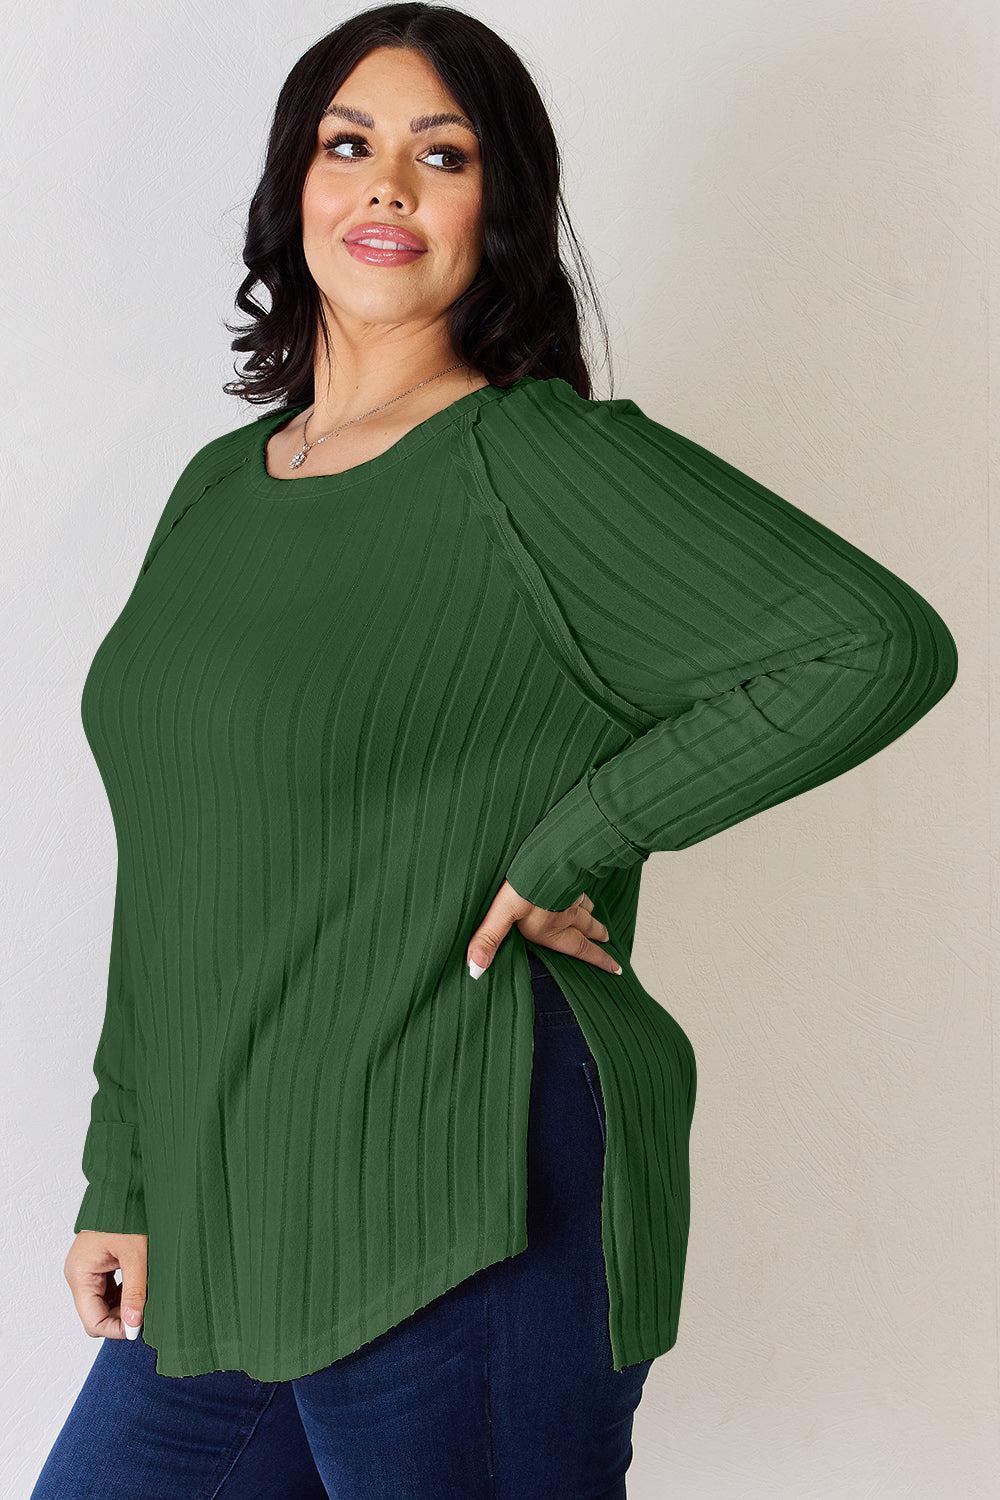 a woman in a green top is posing for a picture